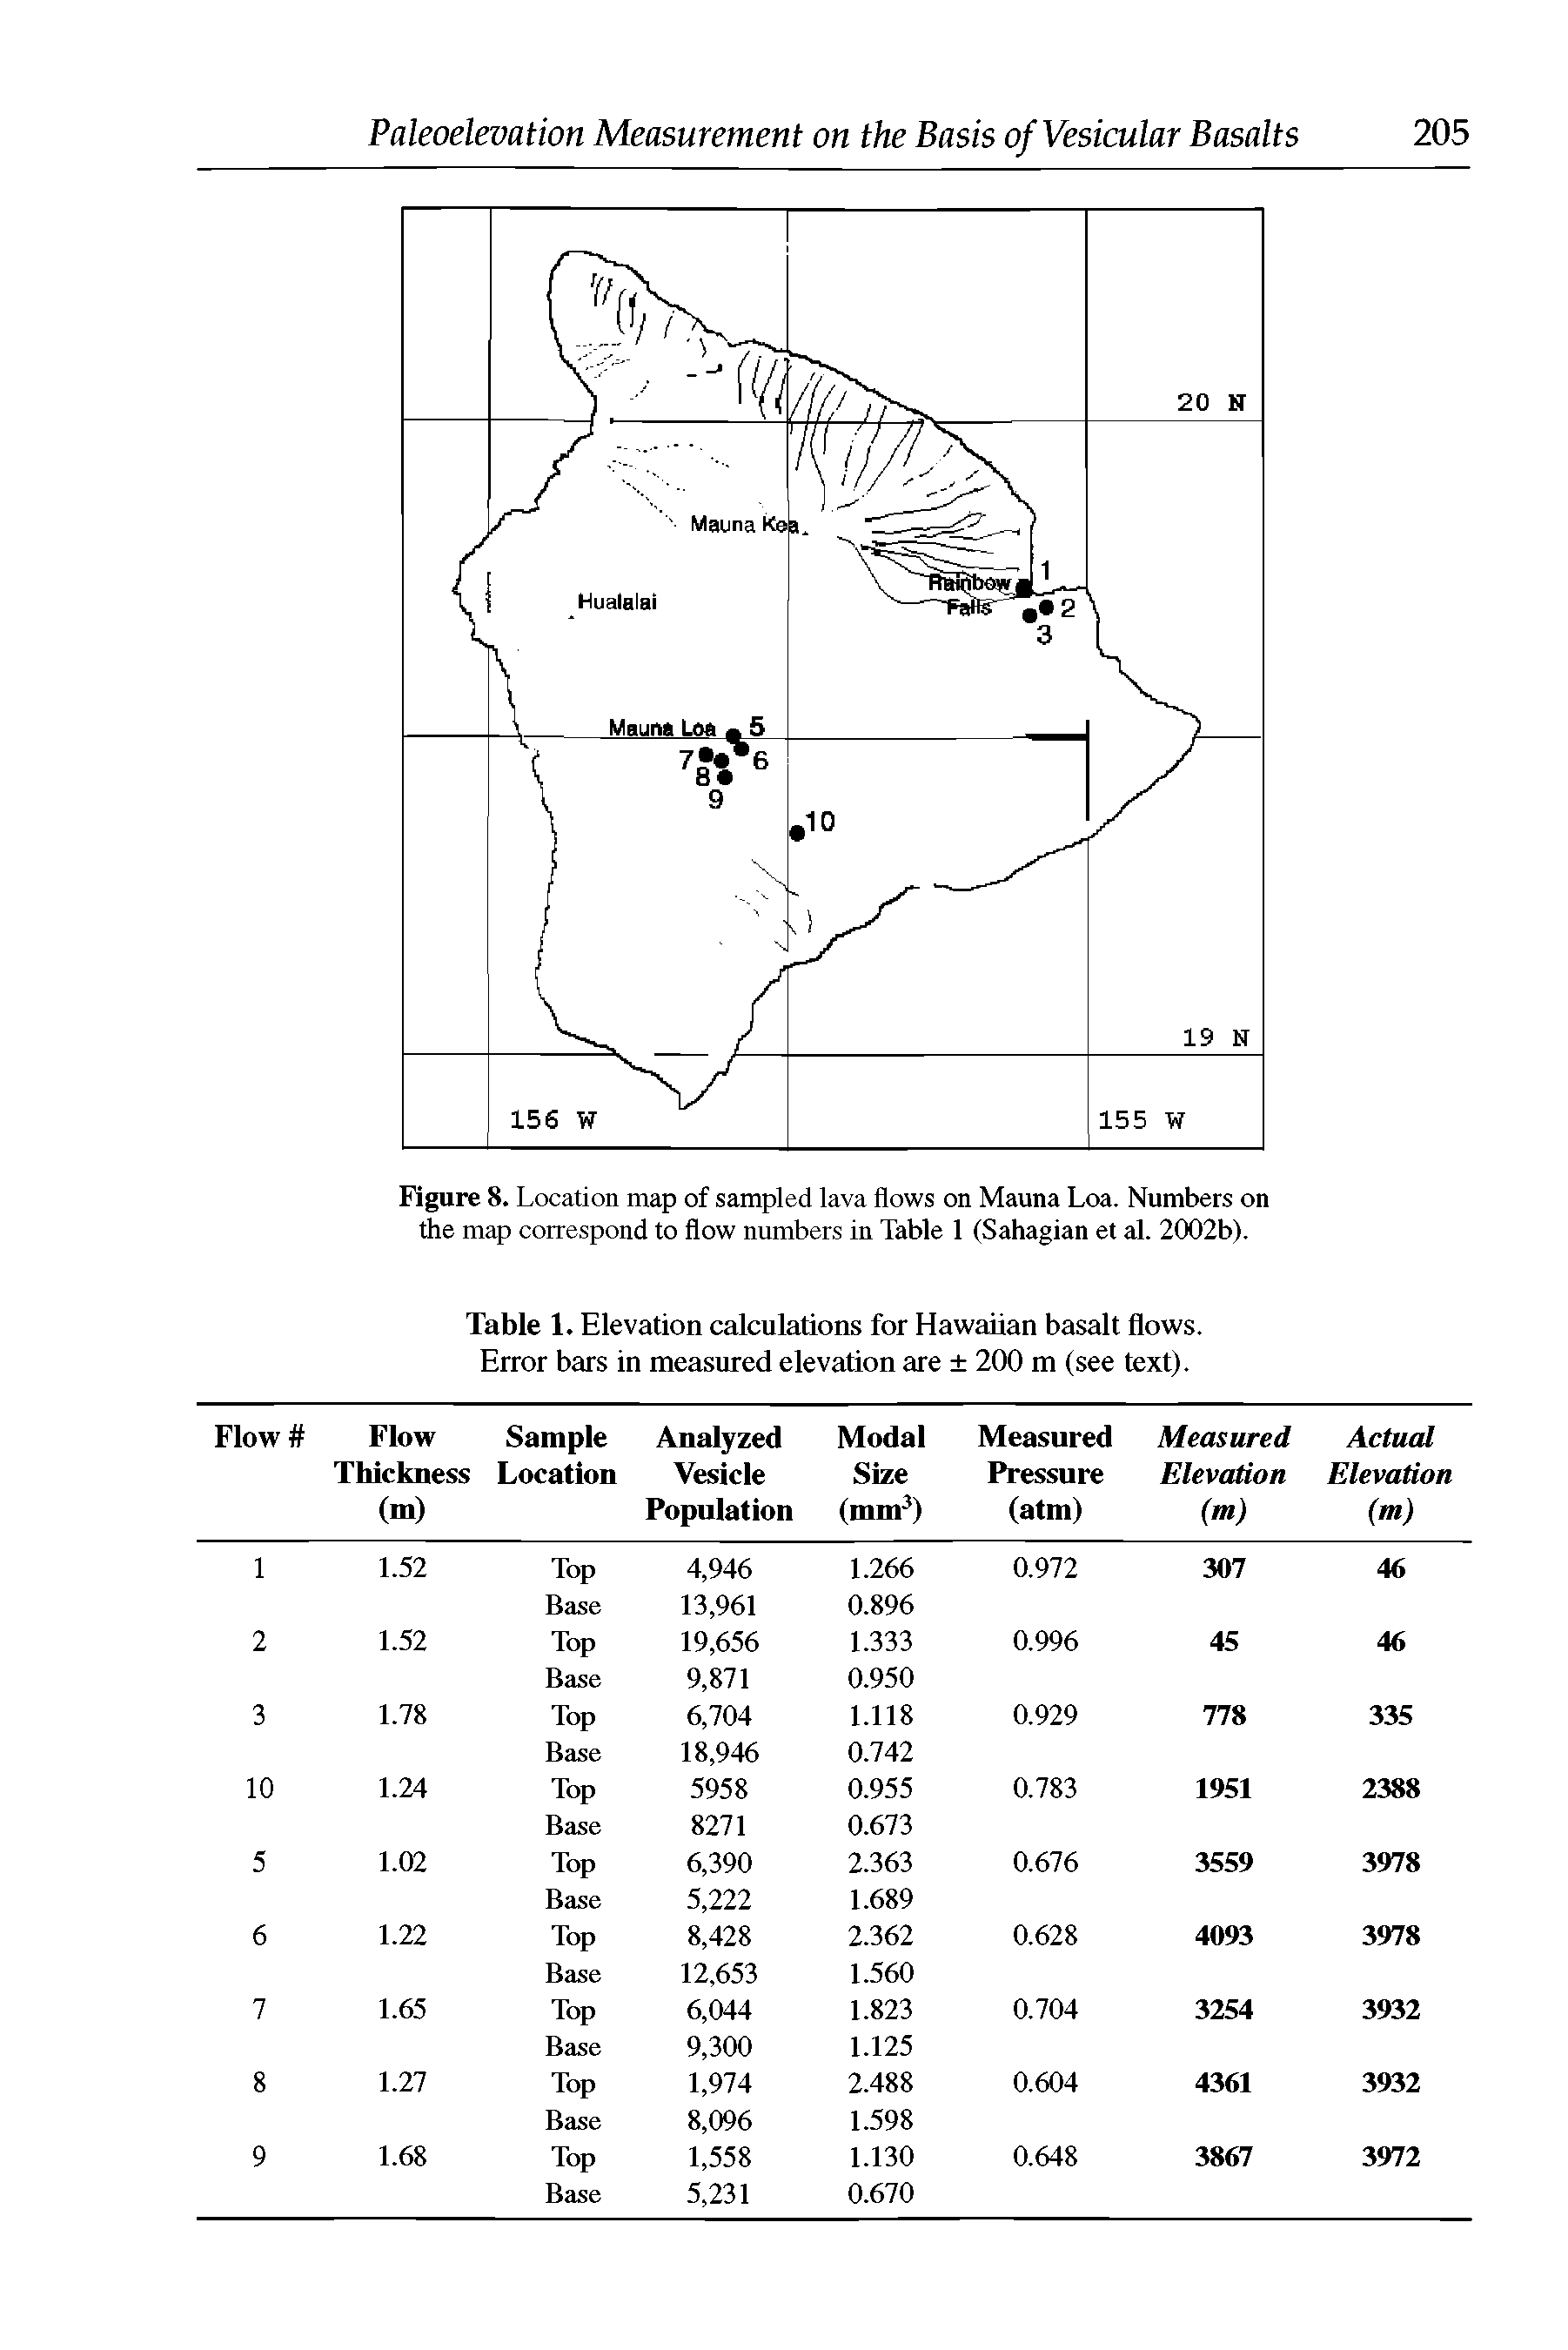 Figure 8. Location map of sampled lava flows on Mauna Loa. Numbers on the map correspond to flow numbers in Table 1 (Sahagian et al. 2002b).